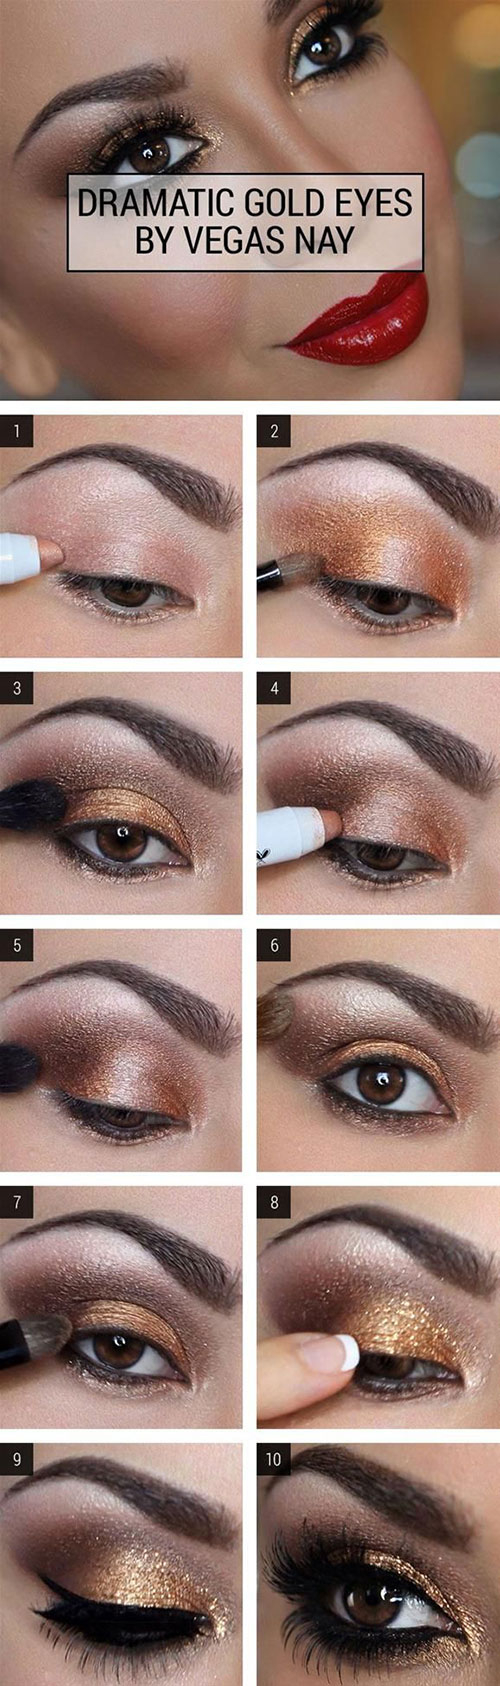 Easy Evening Eye Makeup How To Do Smokey Eye Makeup Top 10 Tutorial Pictures For 2019